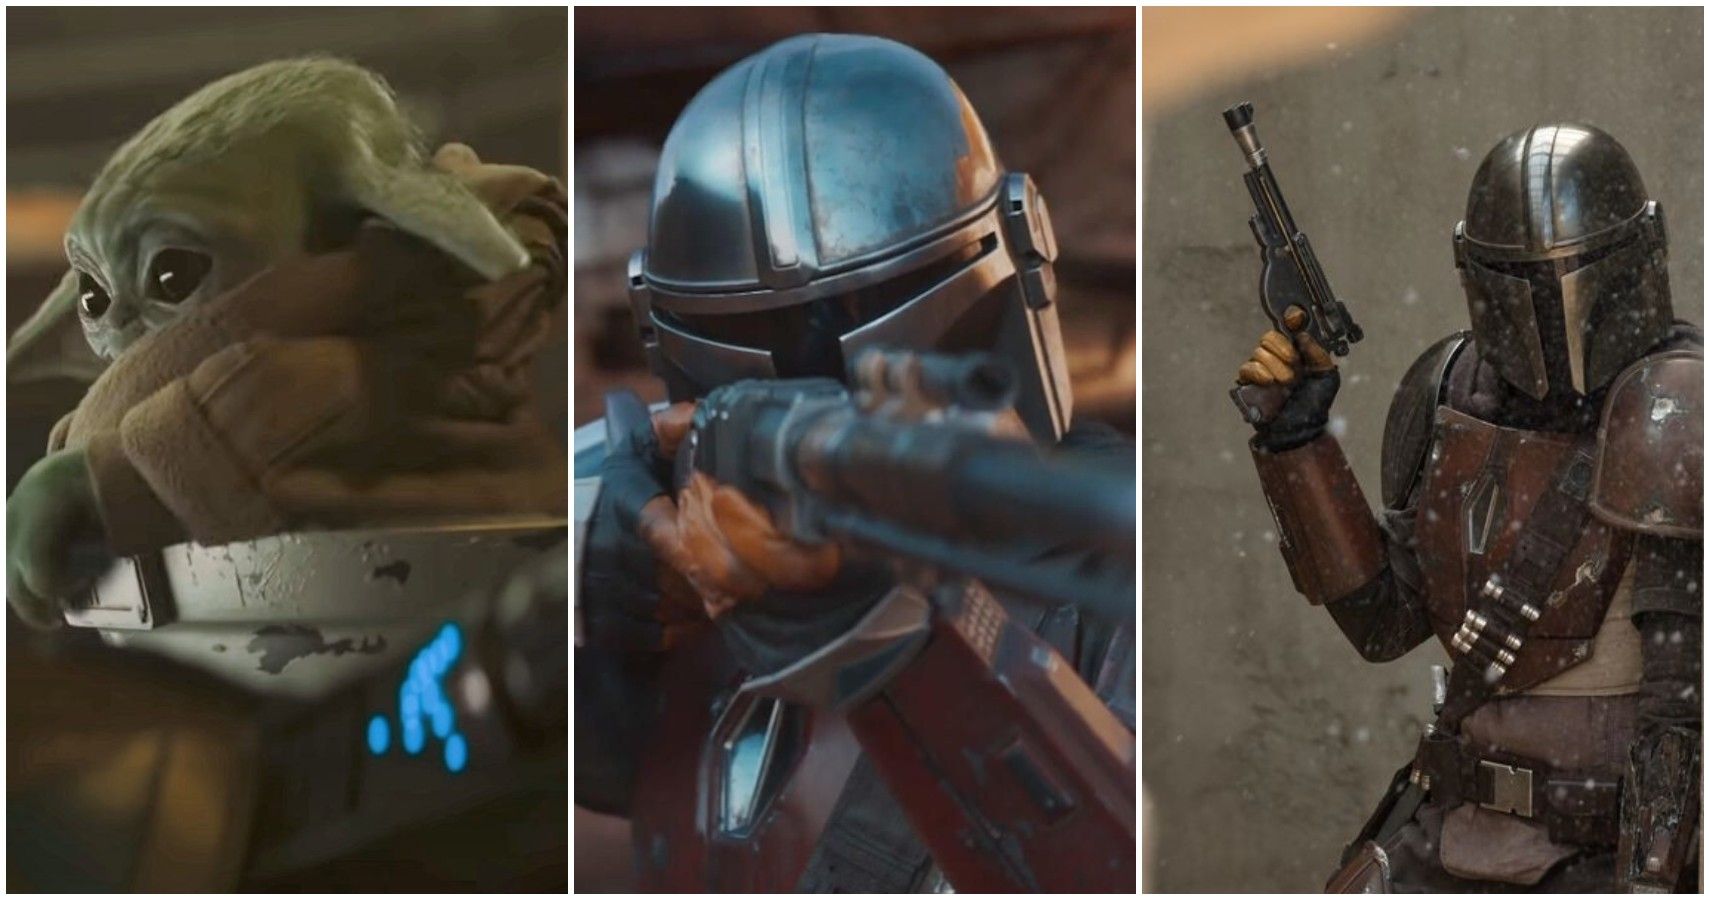 Mandalorian weapons and tools